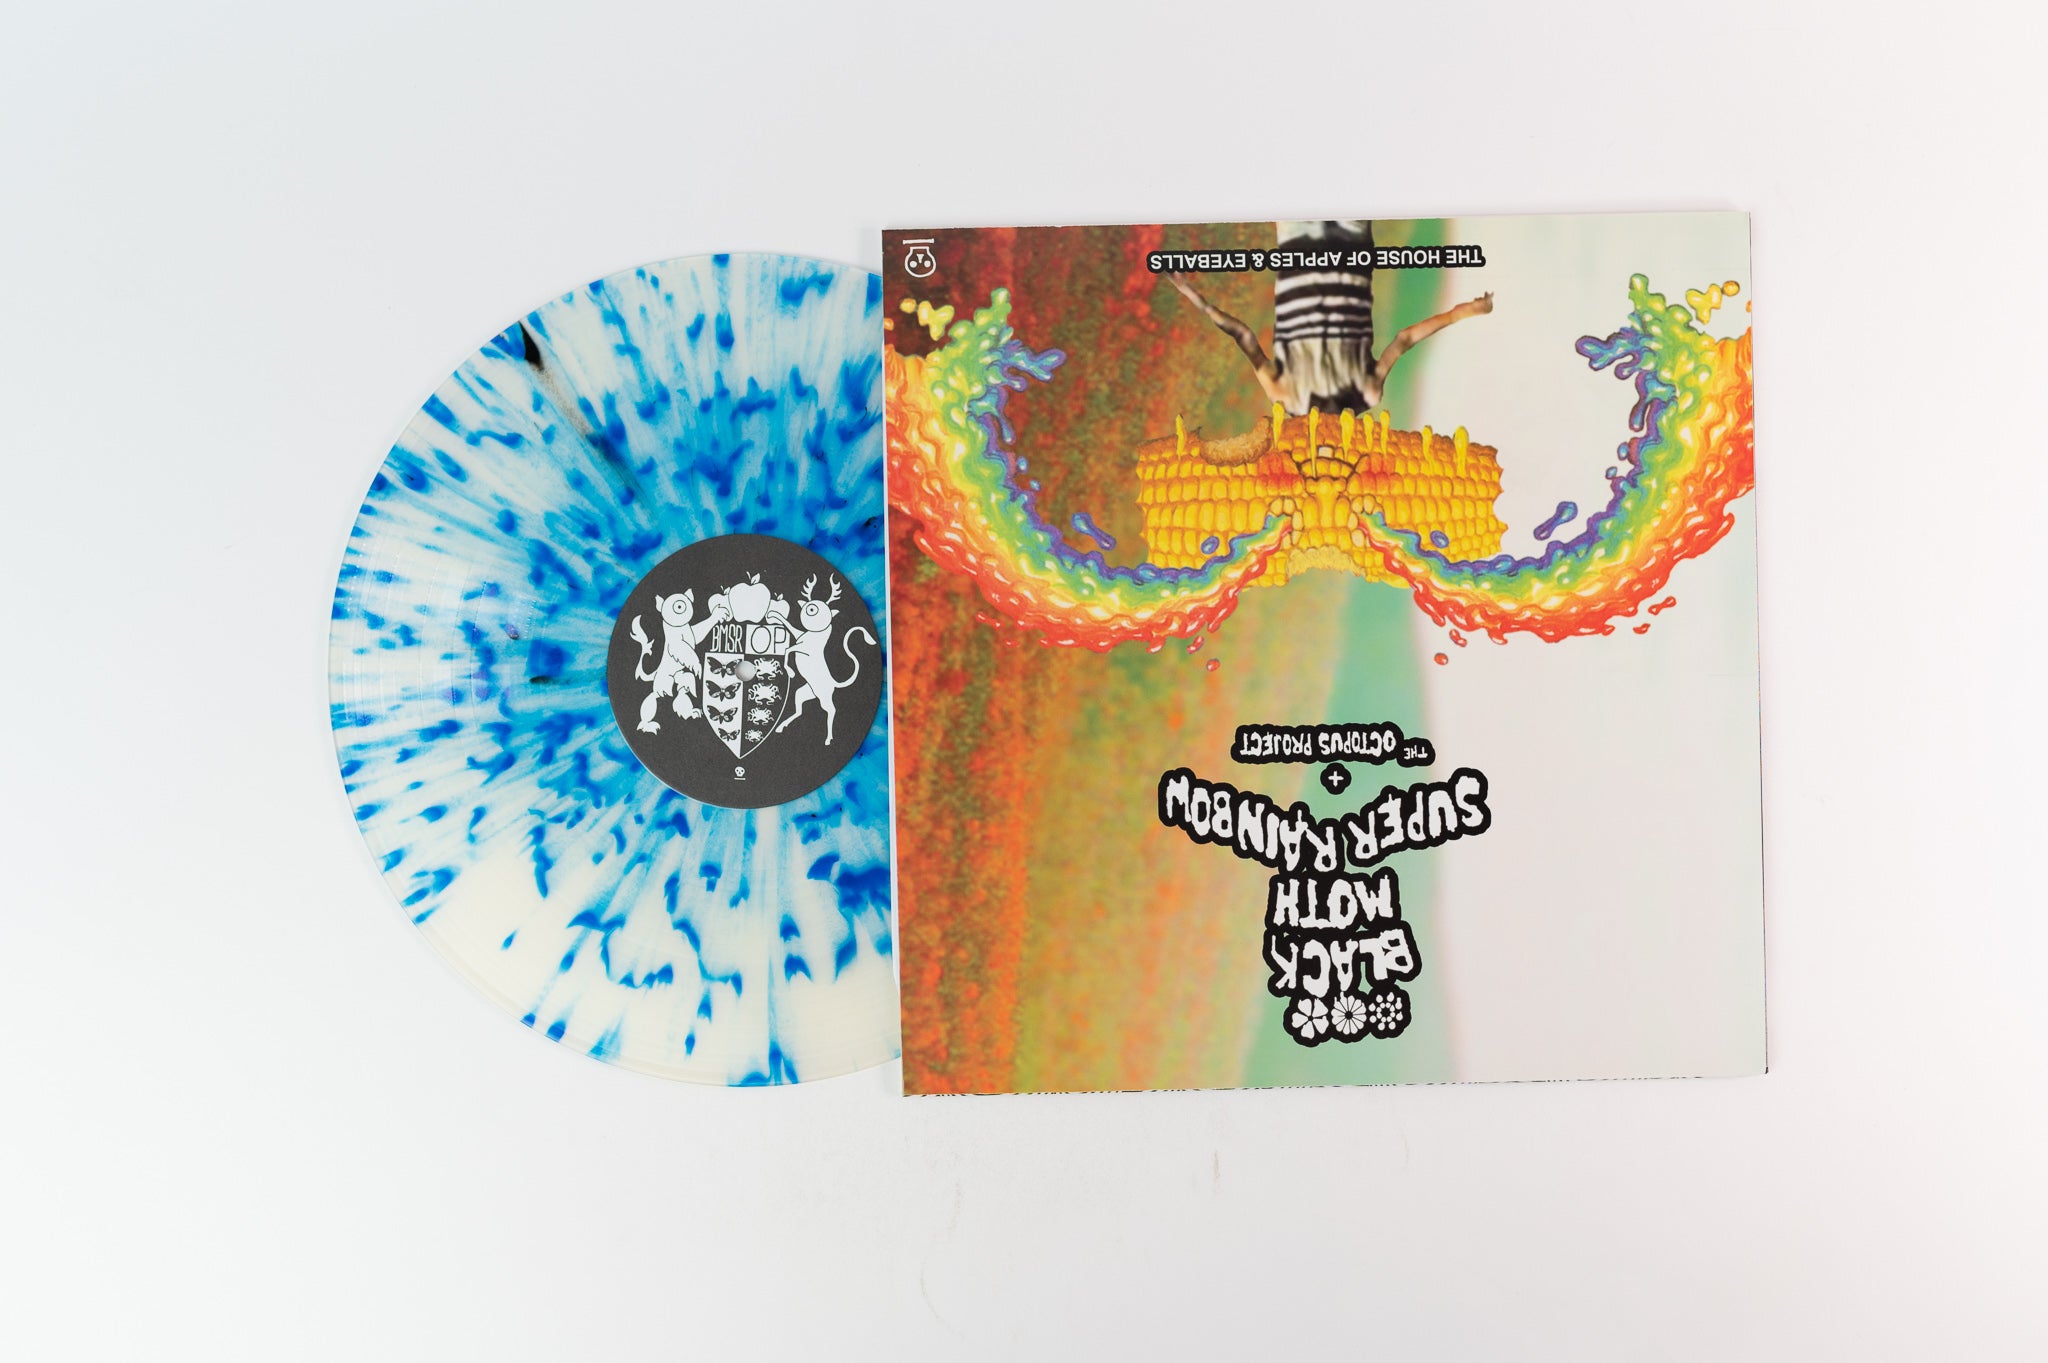 Black Moth Super Rainbow - The House Of Apples And Eyeballs on Graveface Limited Clear With Blue Splatter